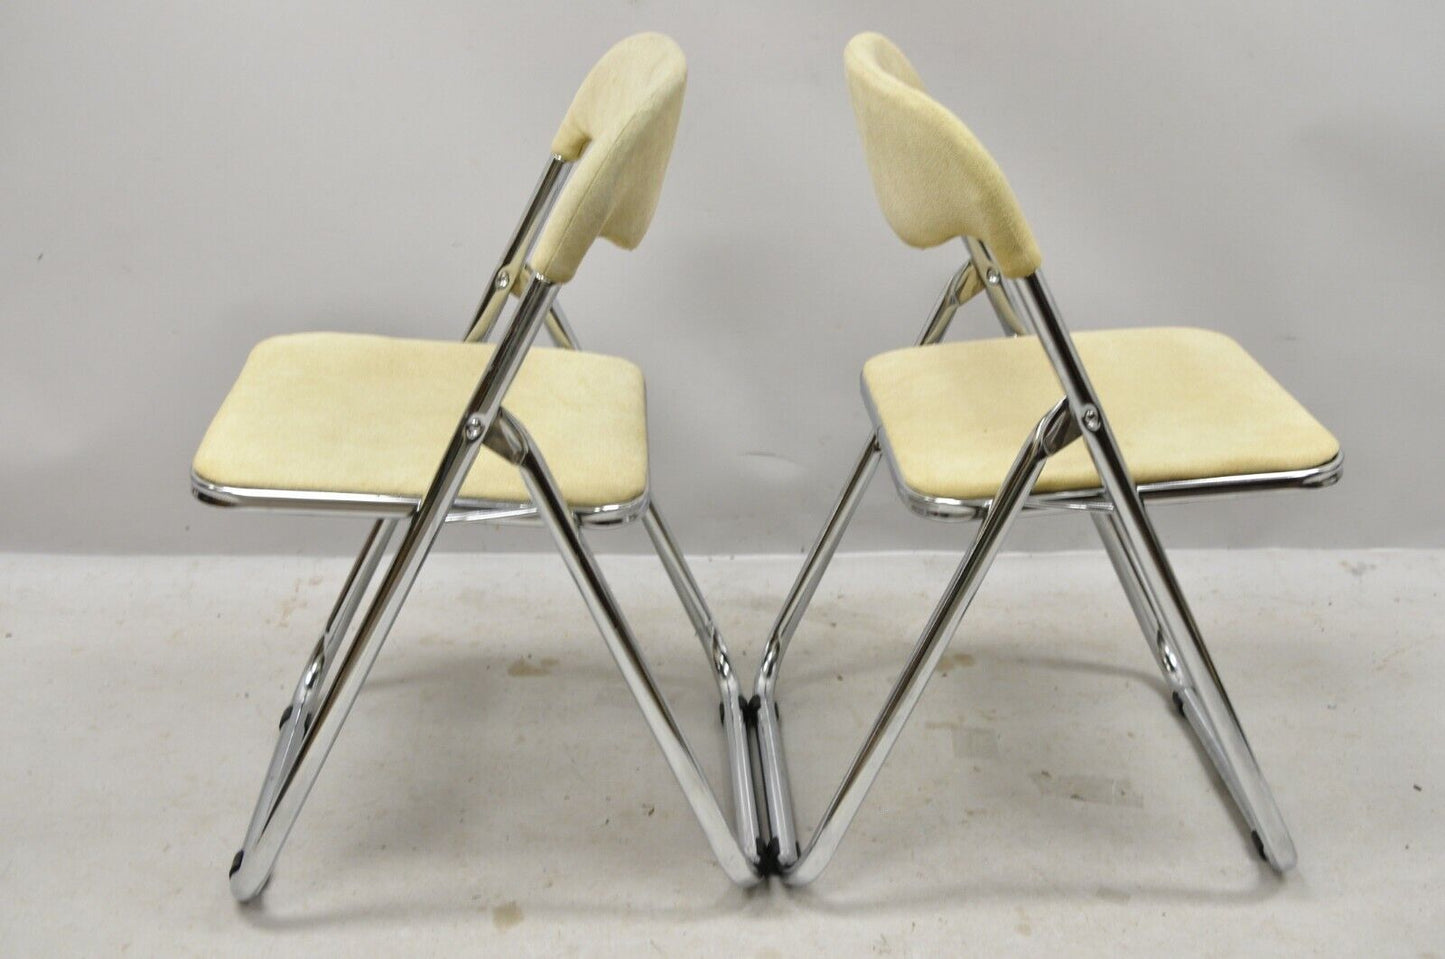 Vintage Italian Mid Century Chrome Upholstered Folding Game Chairs - Set of 4